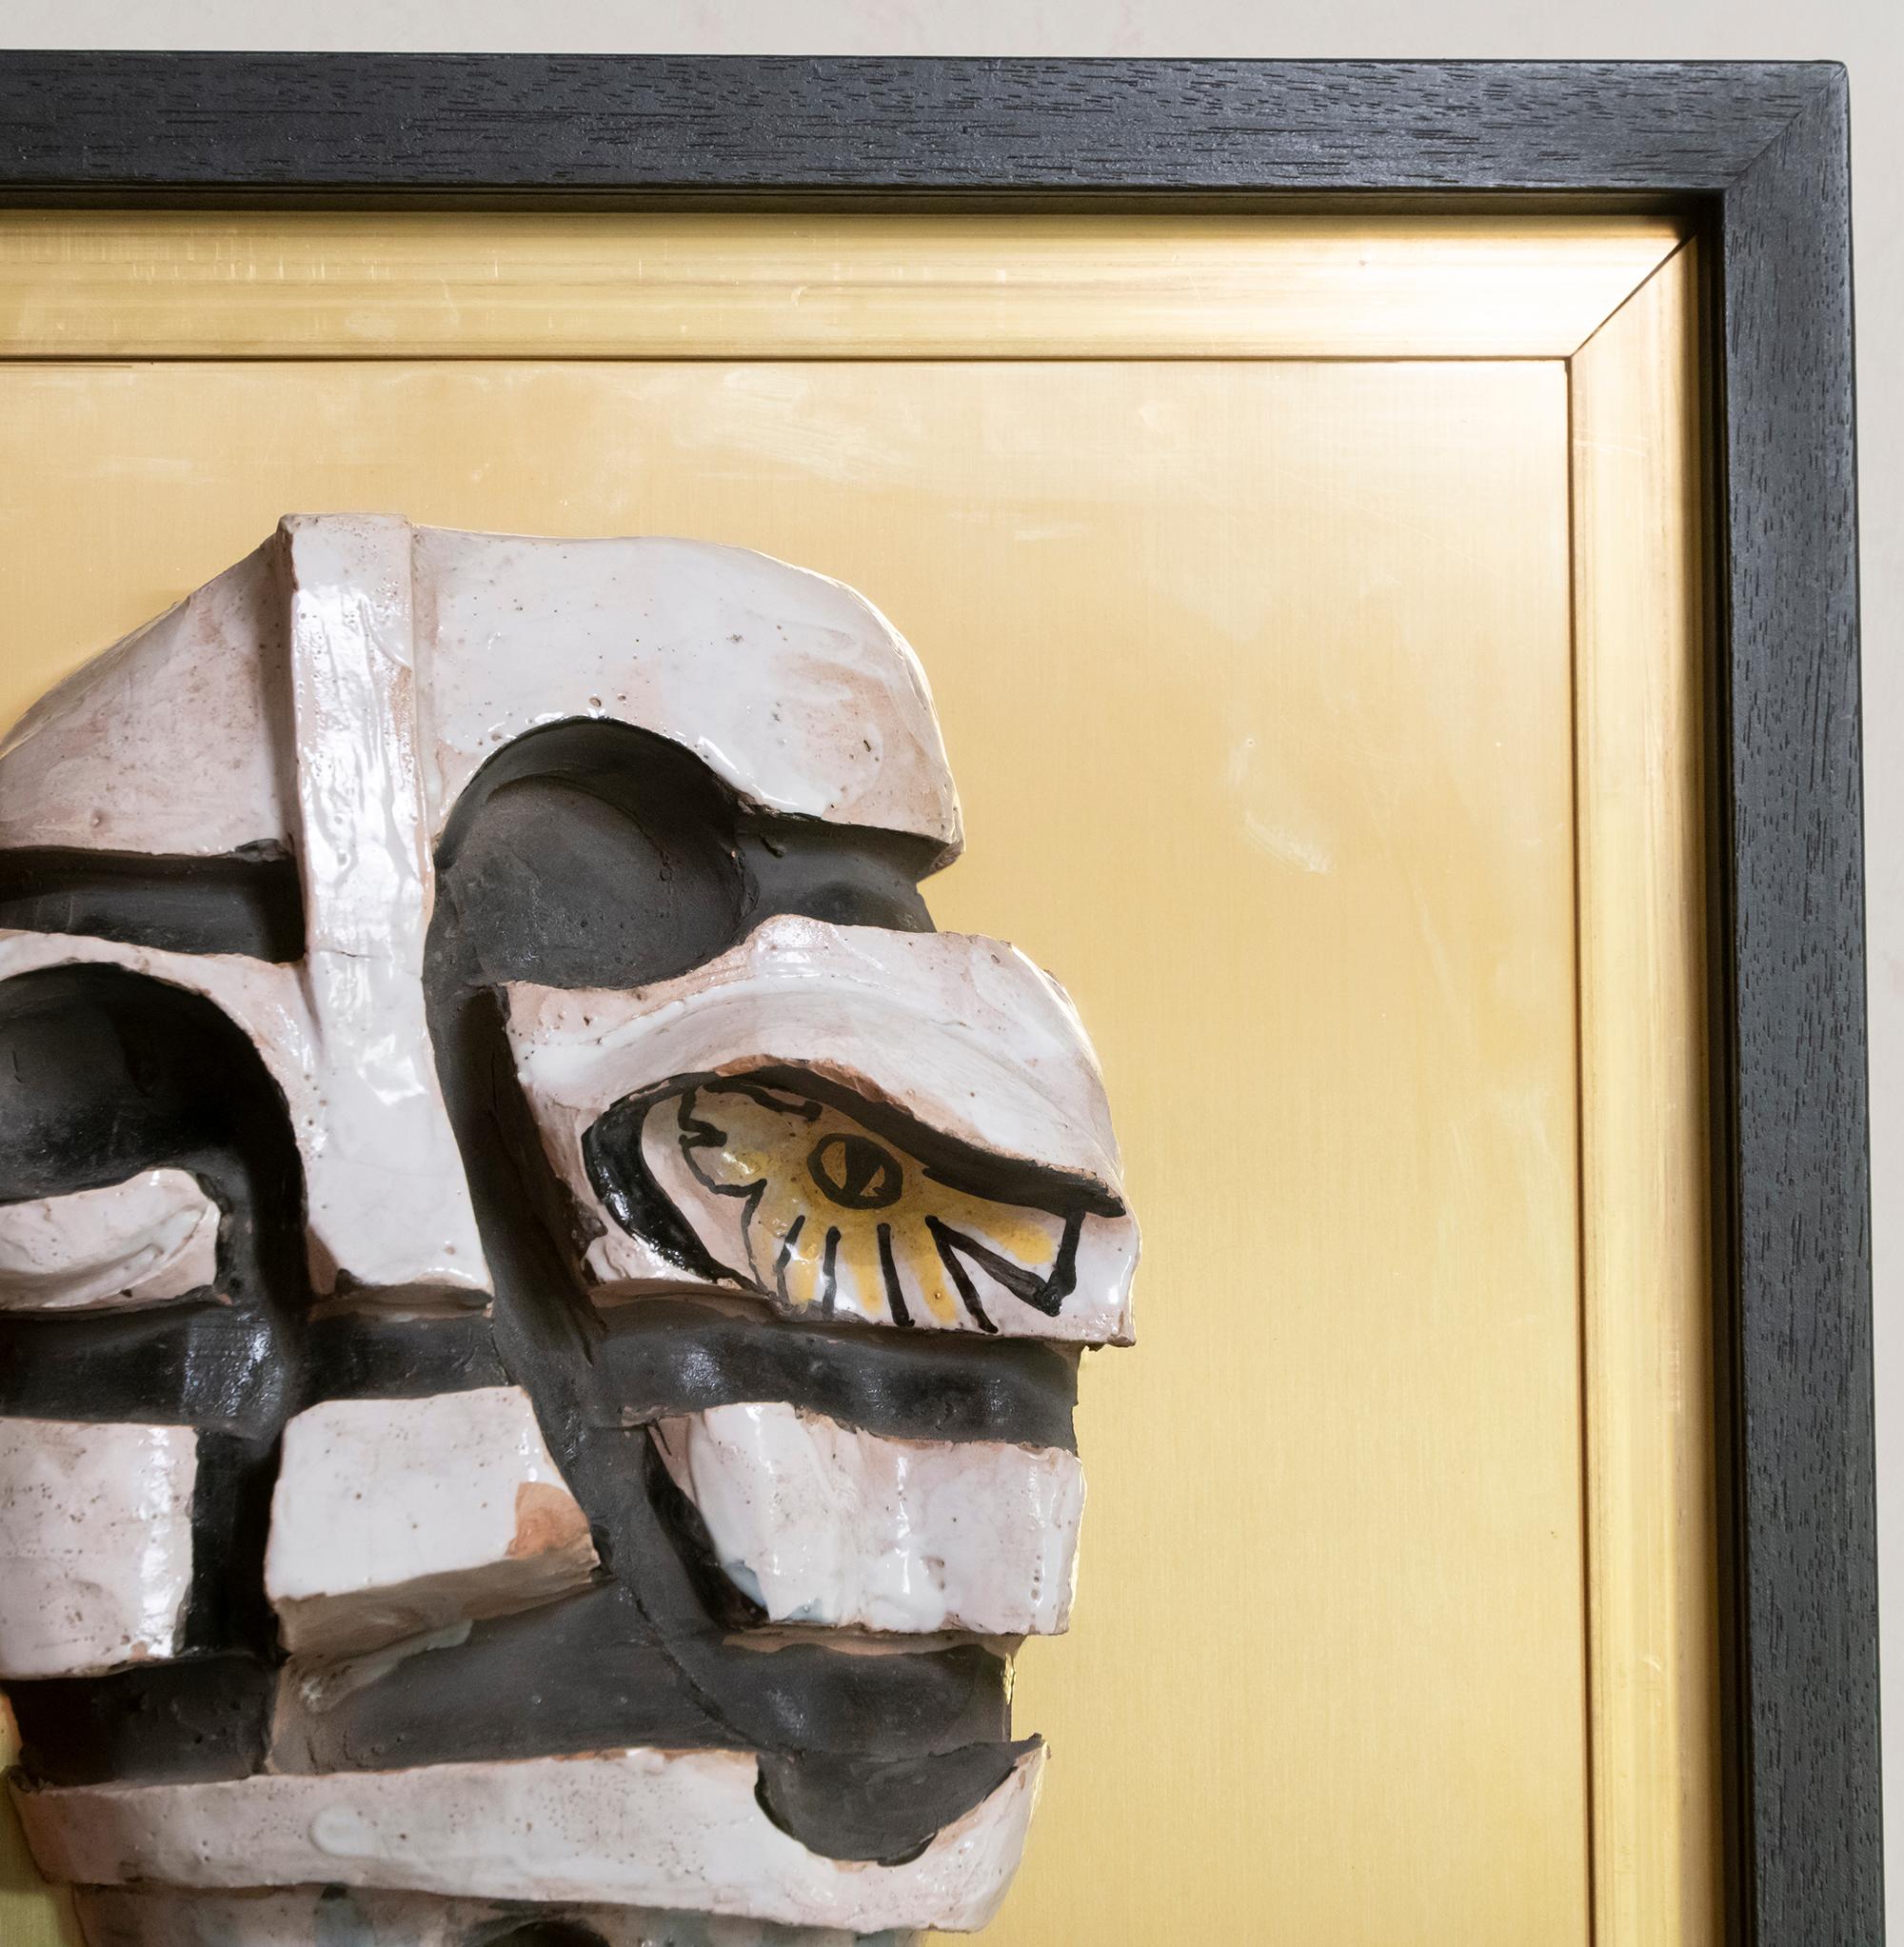 Cubism style figurative glazed terracotta wall art on natural brass structure and framed in black wood, unknown artist, Italy, circa 1970s.